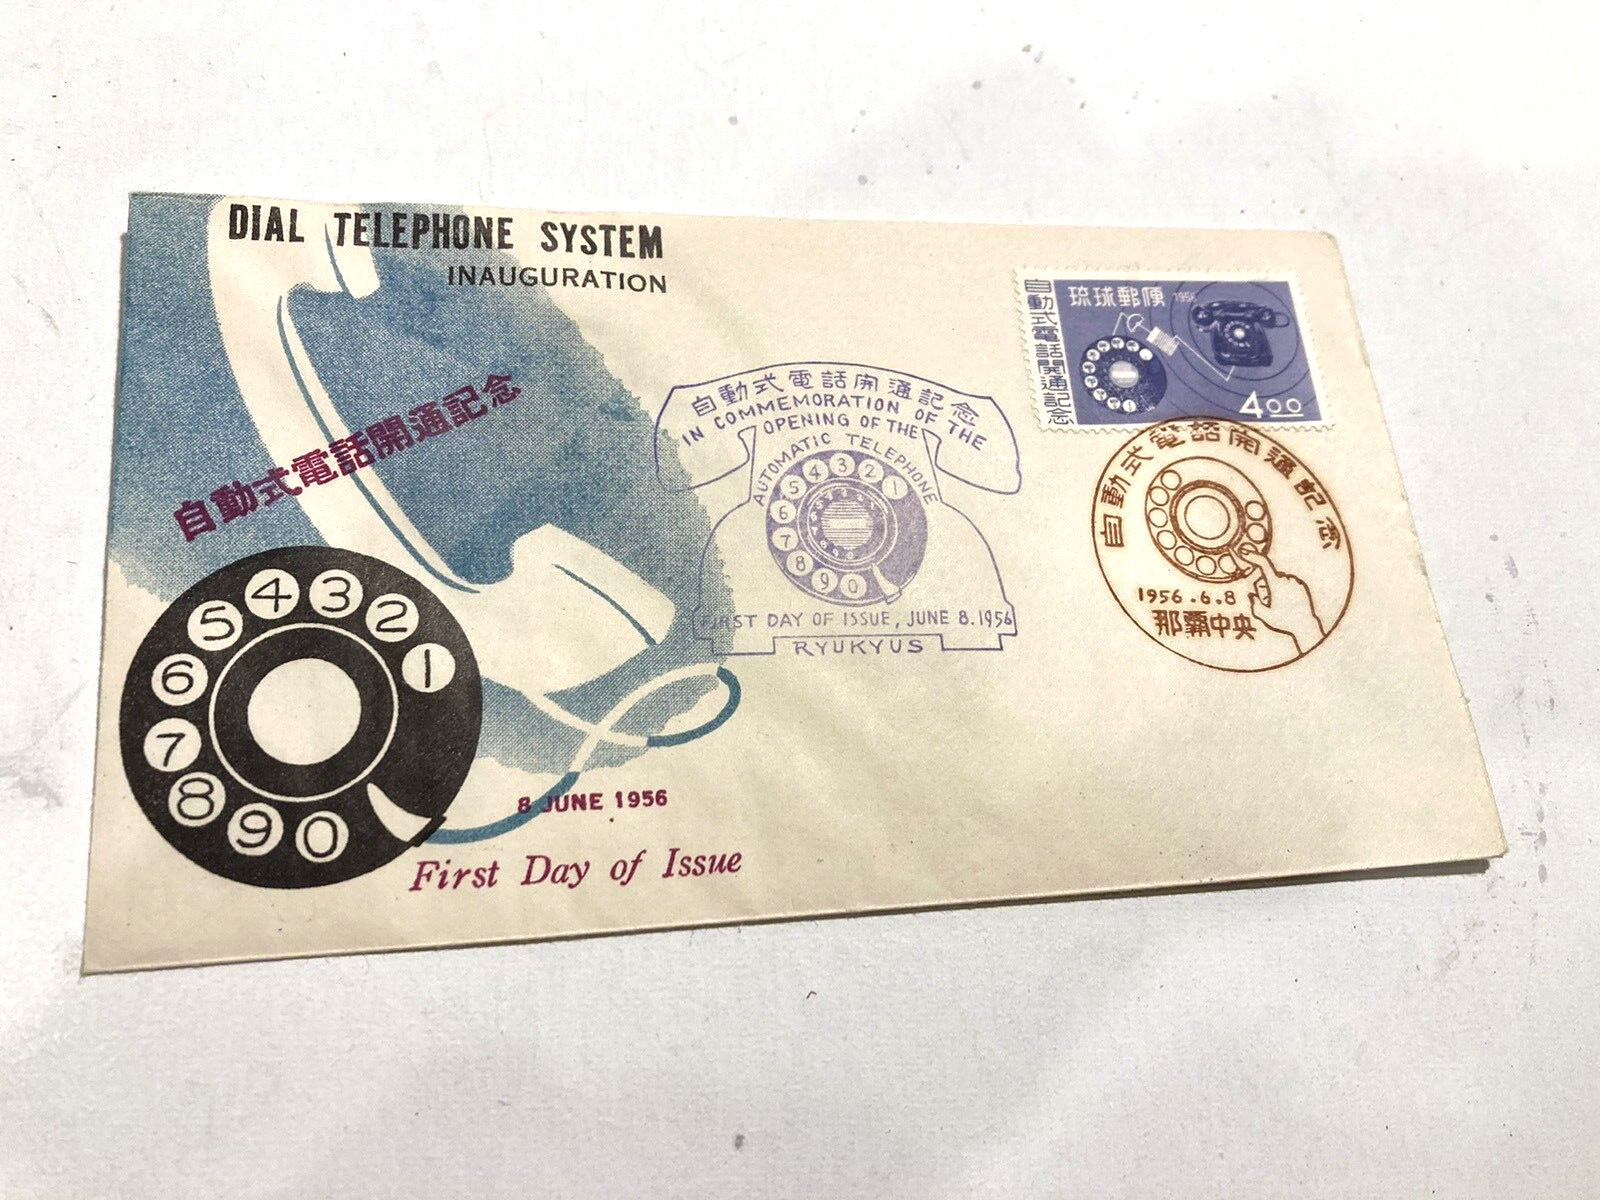 1956 AUTOMATIC DIAL TELEPHONE SYSTEM INAUGURATION ENVELOPE - ASIAN